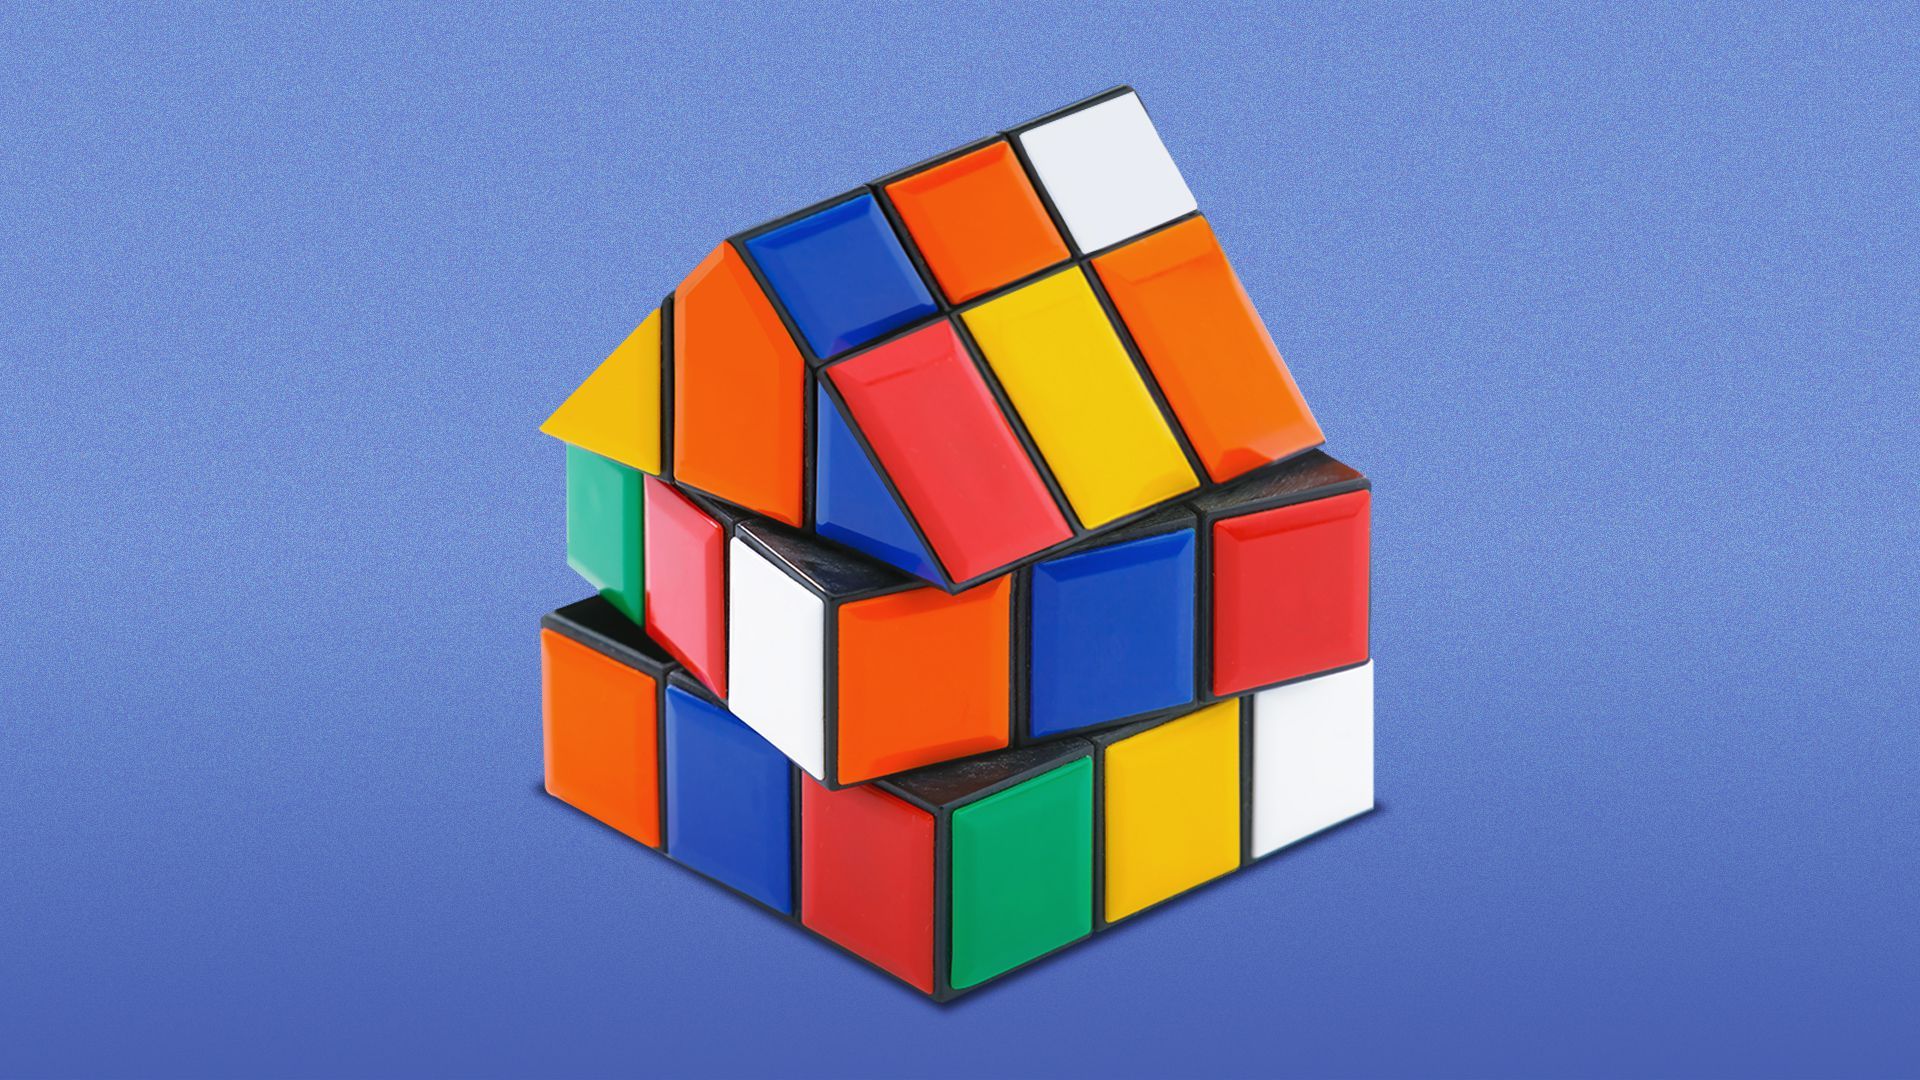 Illustration of a Rubik's cube in the shape of a house. 